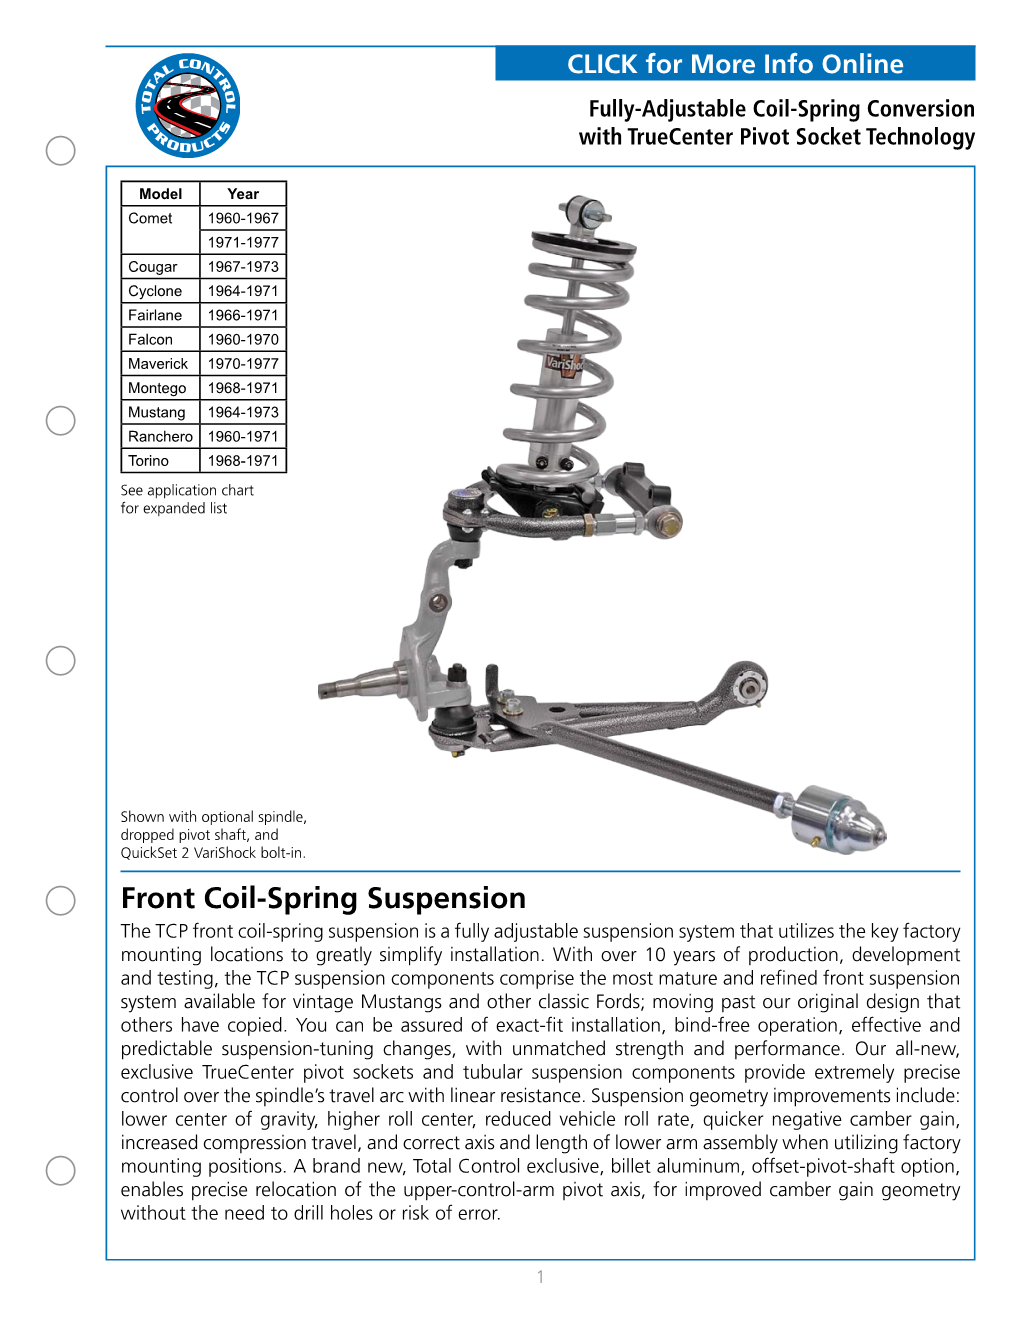 Front Coil-Spring Suspension